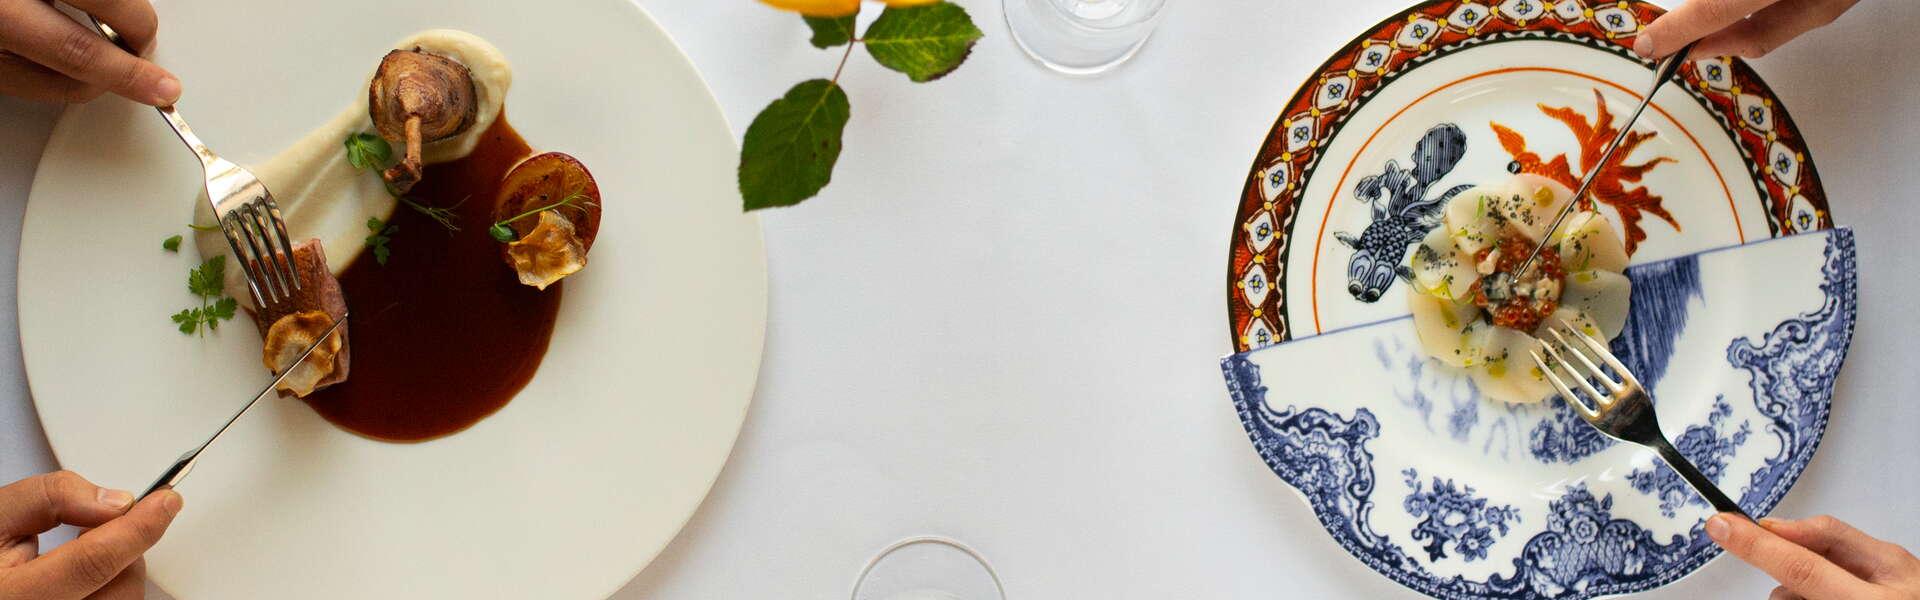 Two plates with elegantly served dishes, a white tablecloth and glasses of wine.